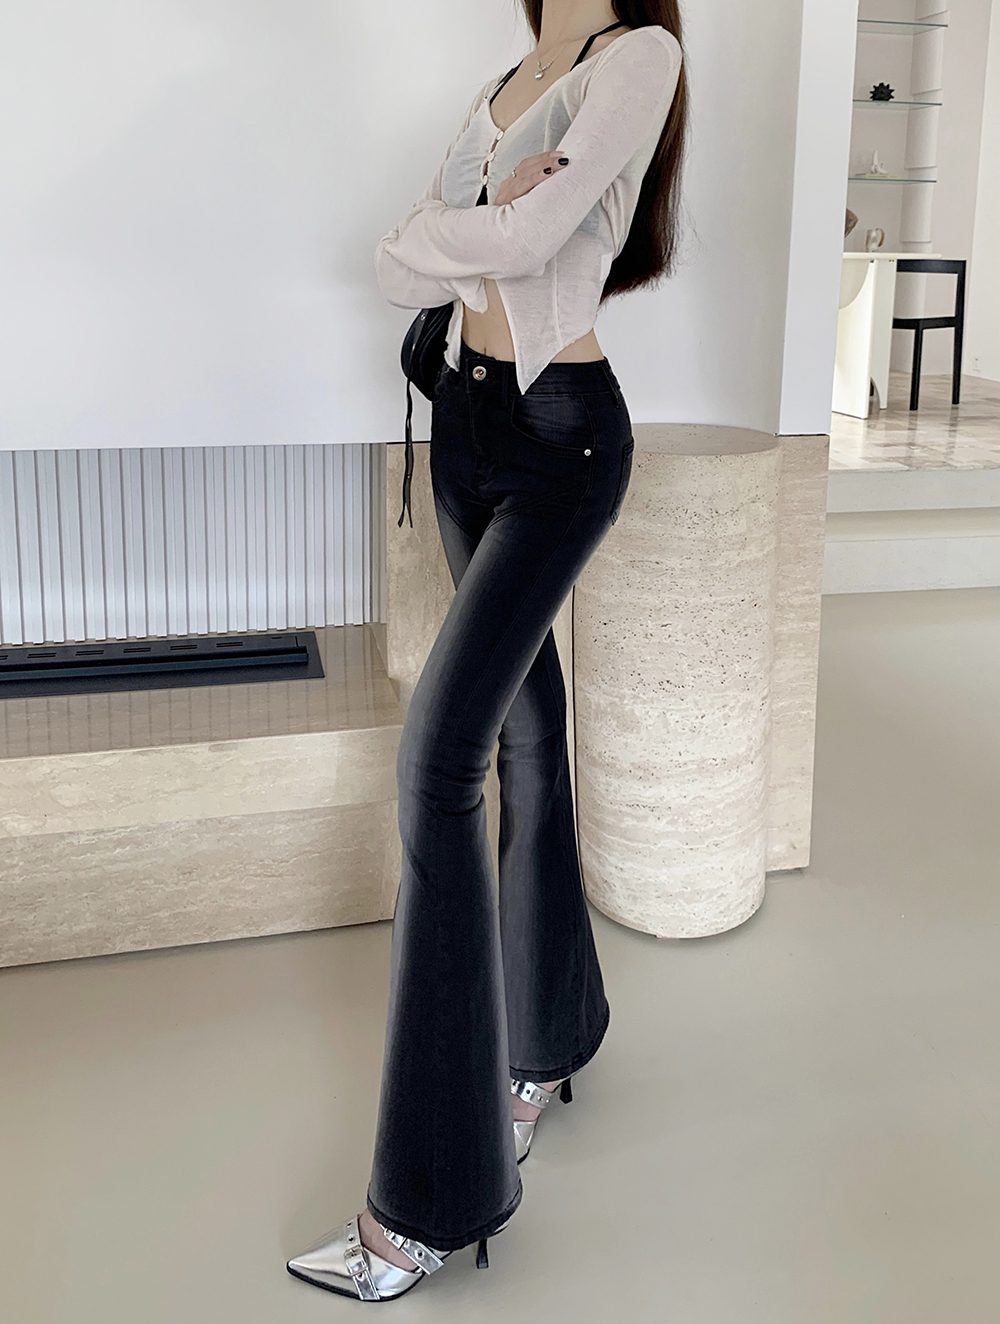 Elasticity mopping jeans slim long pants for women